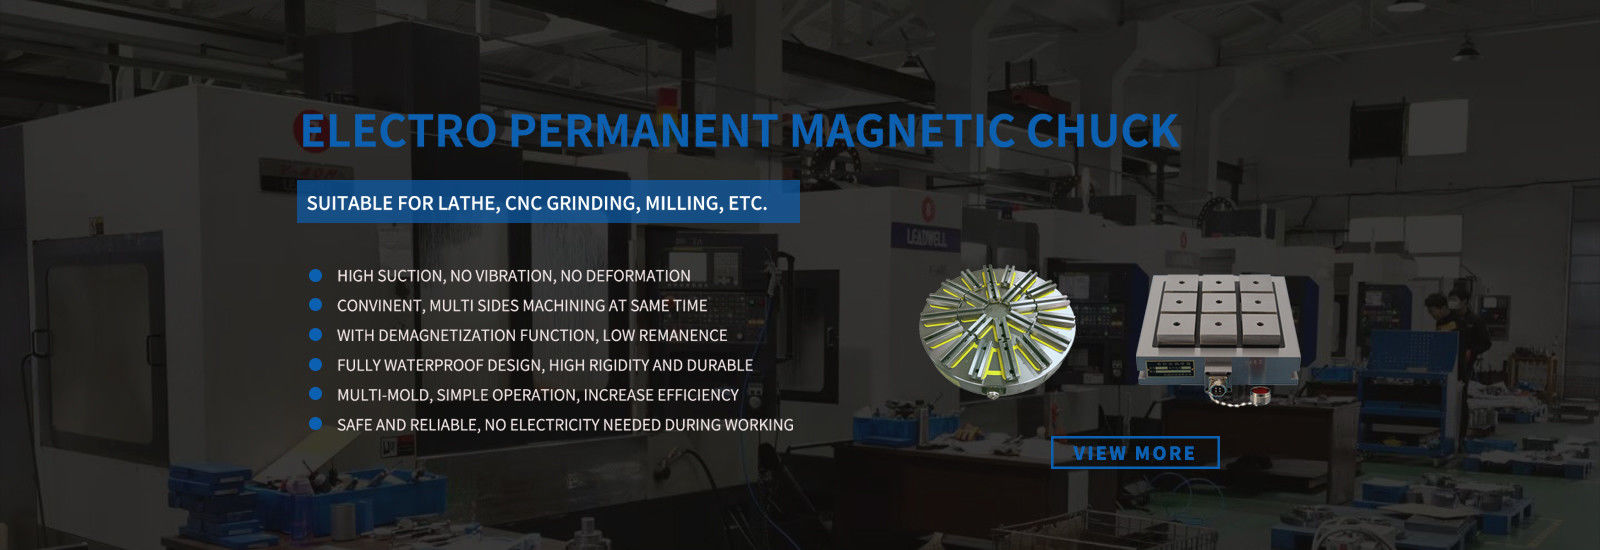 Electro Permanent Magnetic Chuck